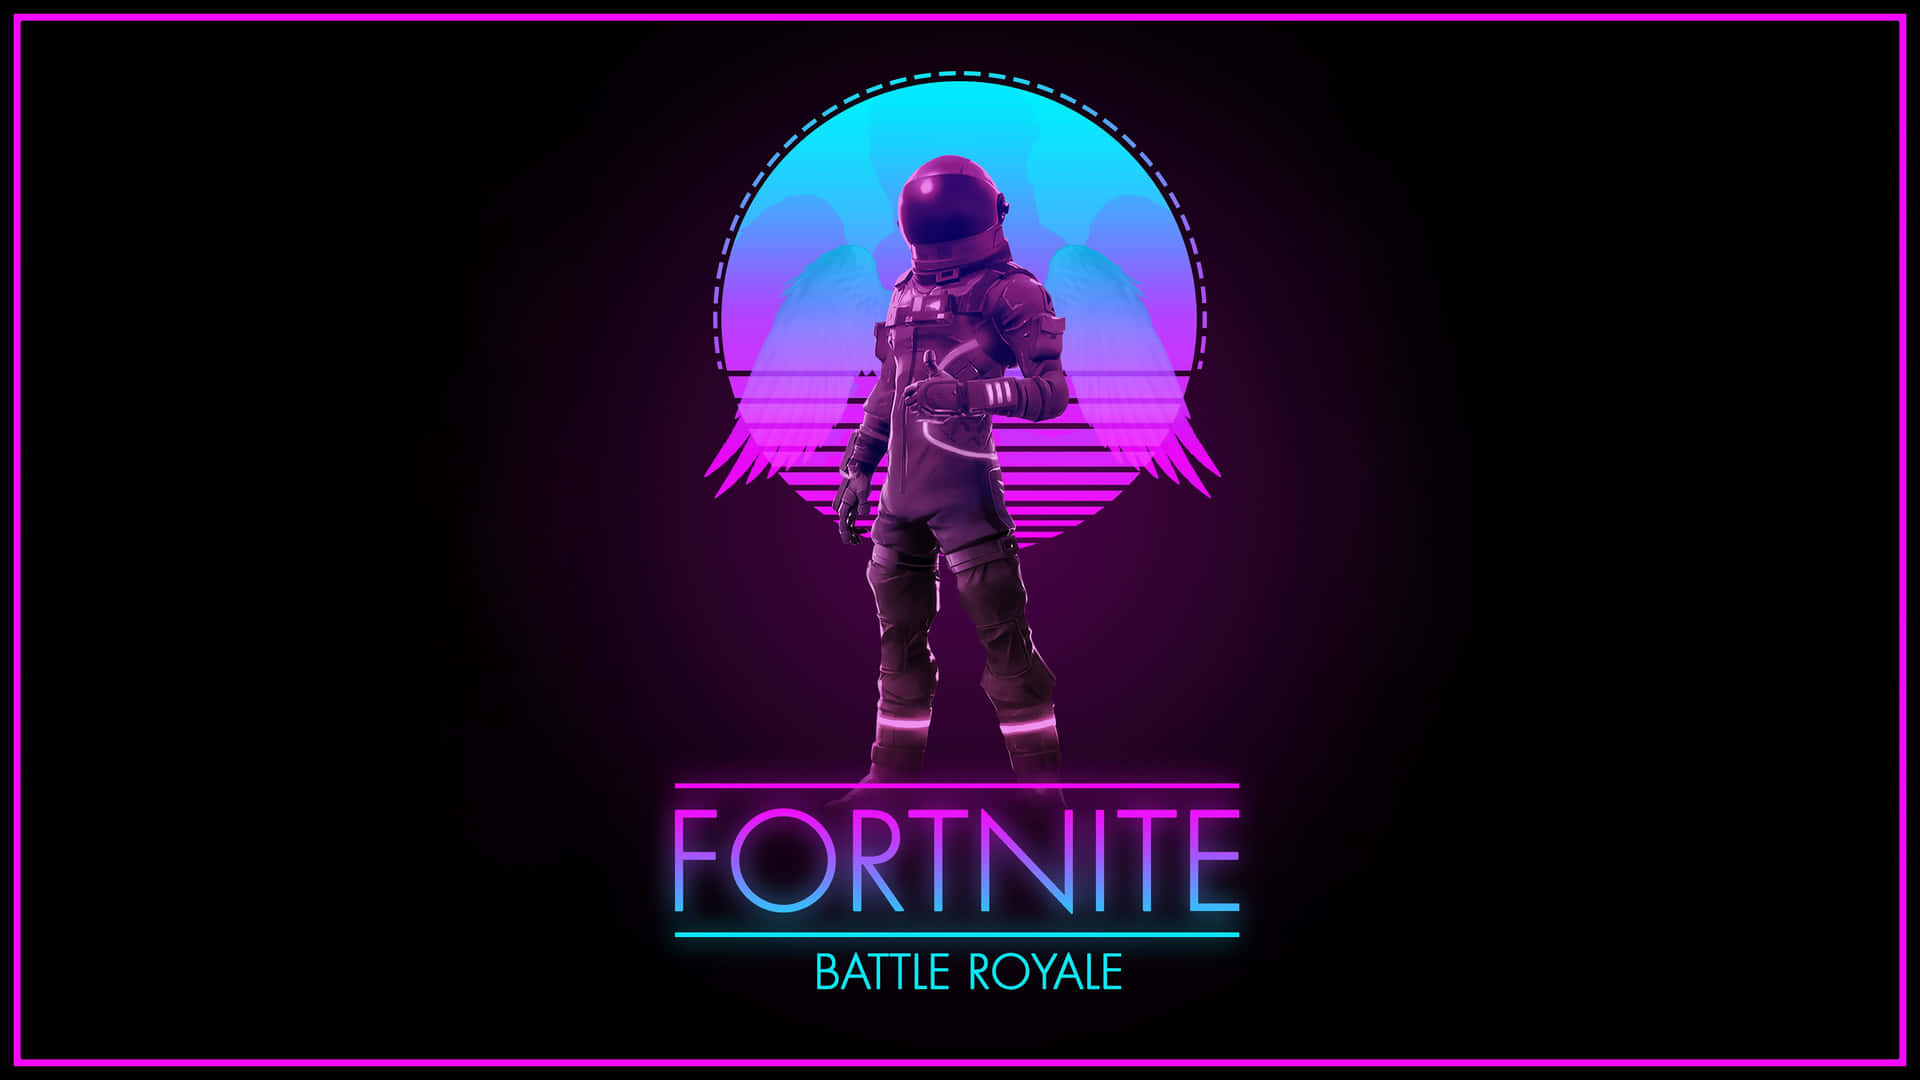 Epic Battle Royale Games Now Here in Cool Fortnite Logo Wallpaper